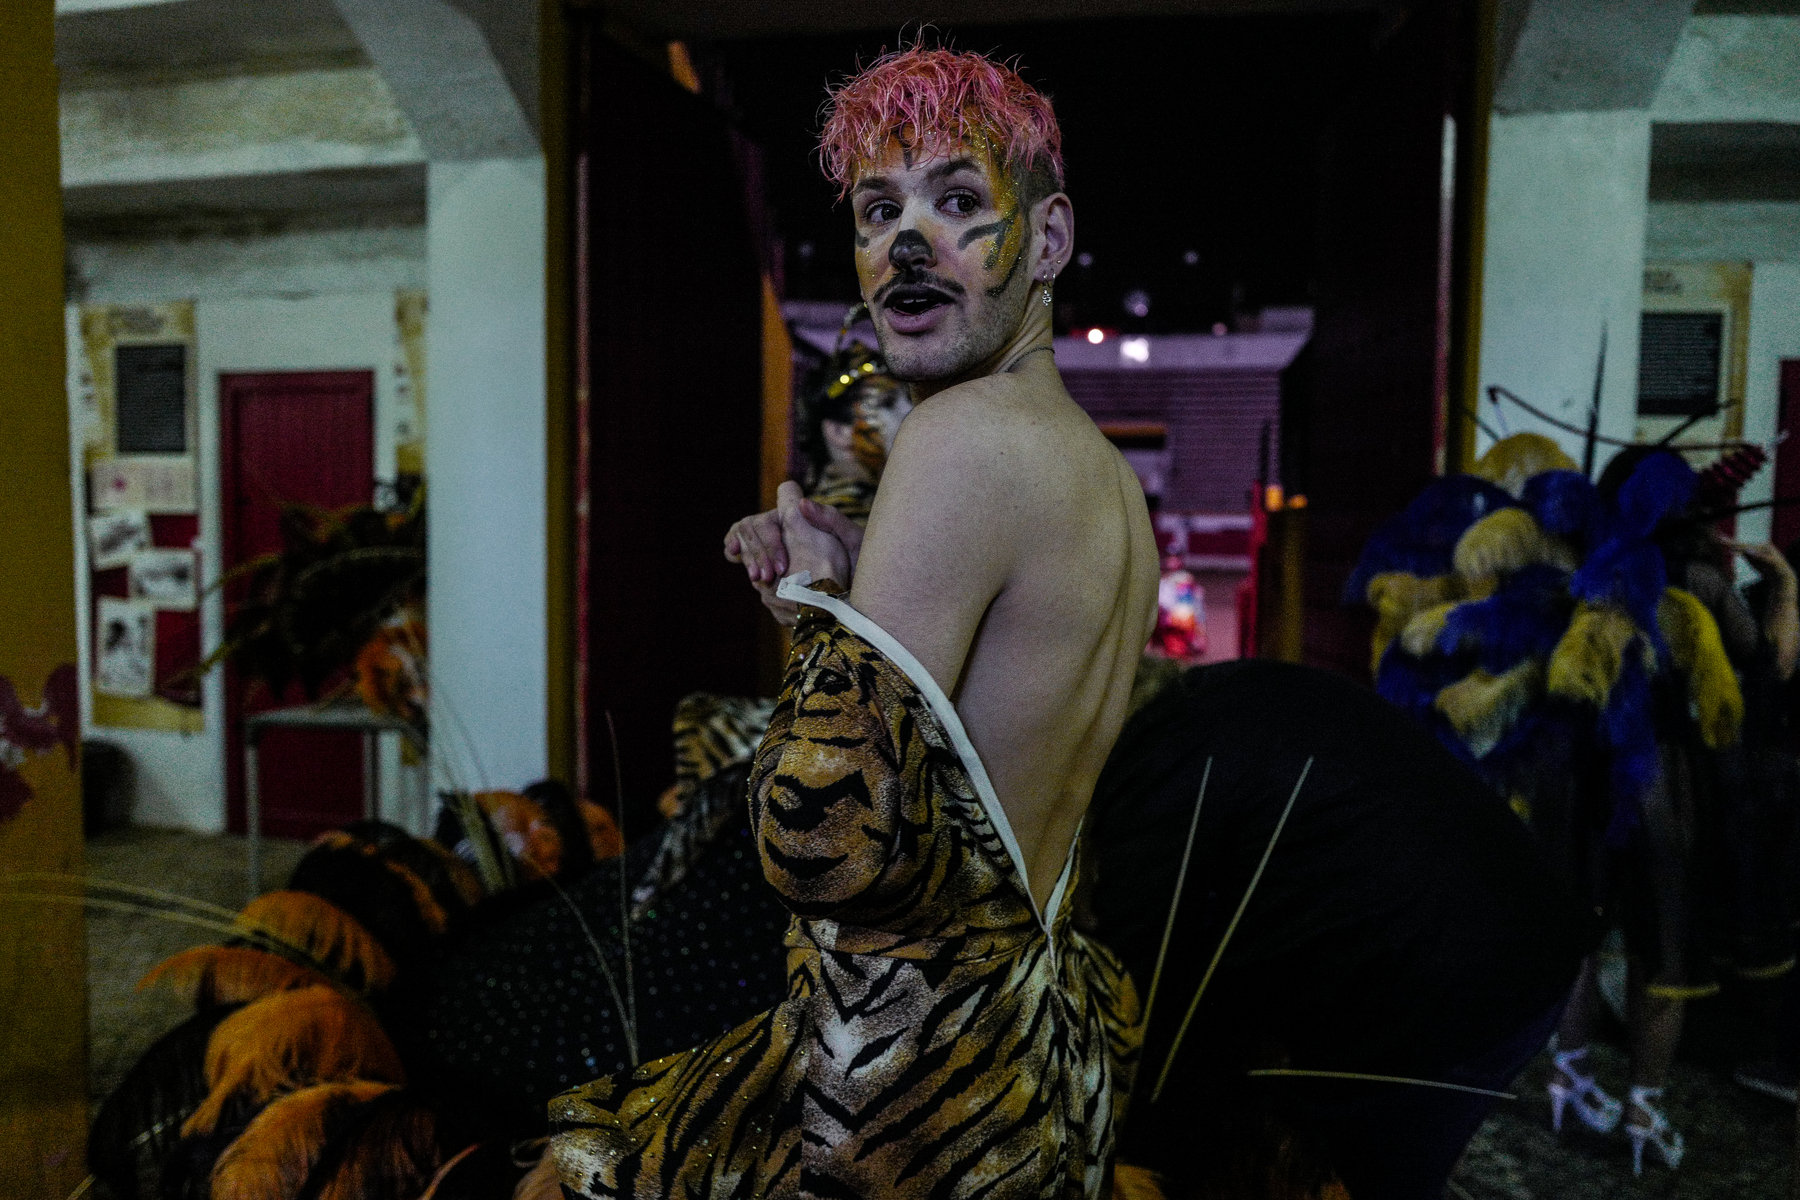 A person with pink hair and tiger face paint is looking back over their shoulder while wearing a striped tiger costume with a tail. There are props and costumes in the blurry background, suggesting a theatrical or festive setting.